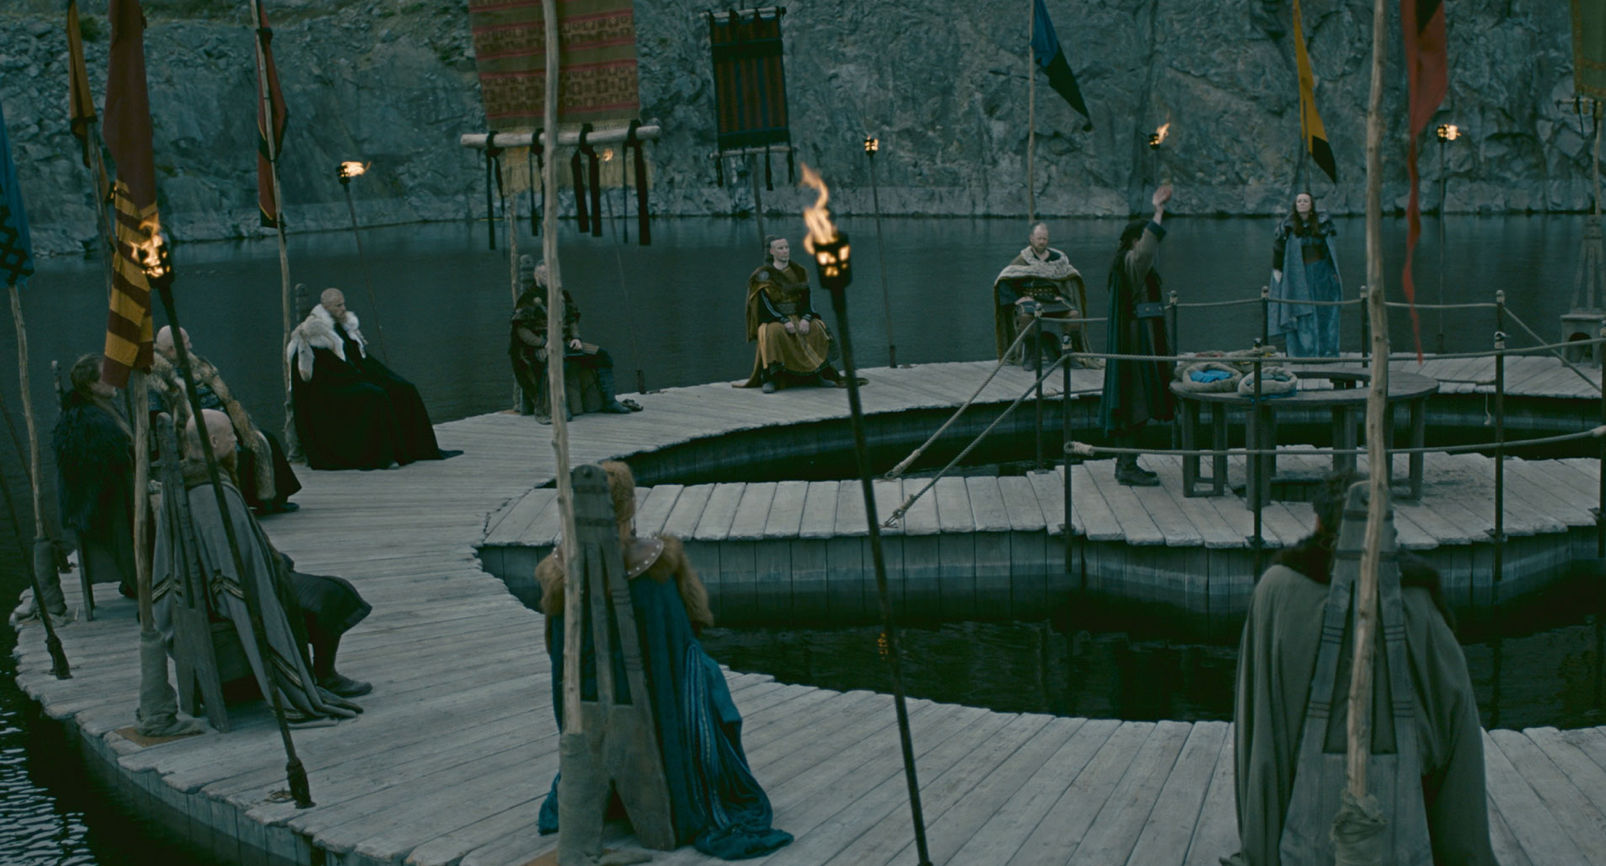 Vikings': Why Did Bjorn Ironside Want to Be King of Norway So Badly?